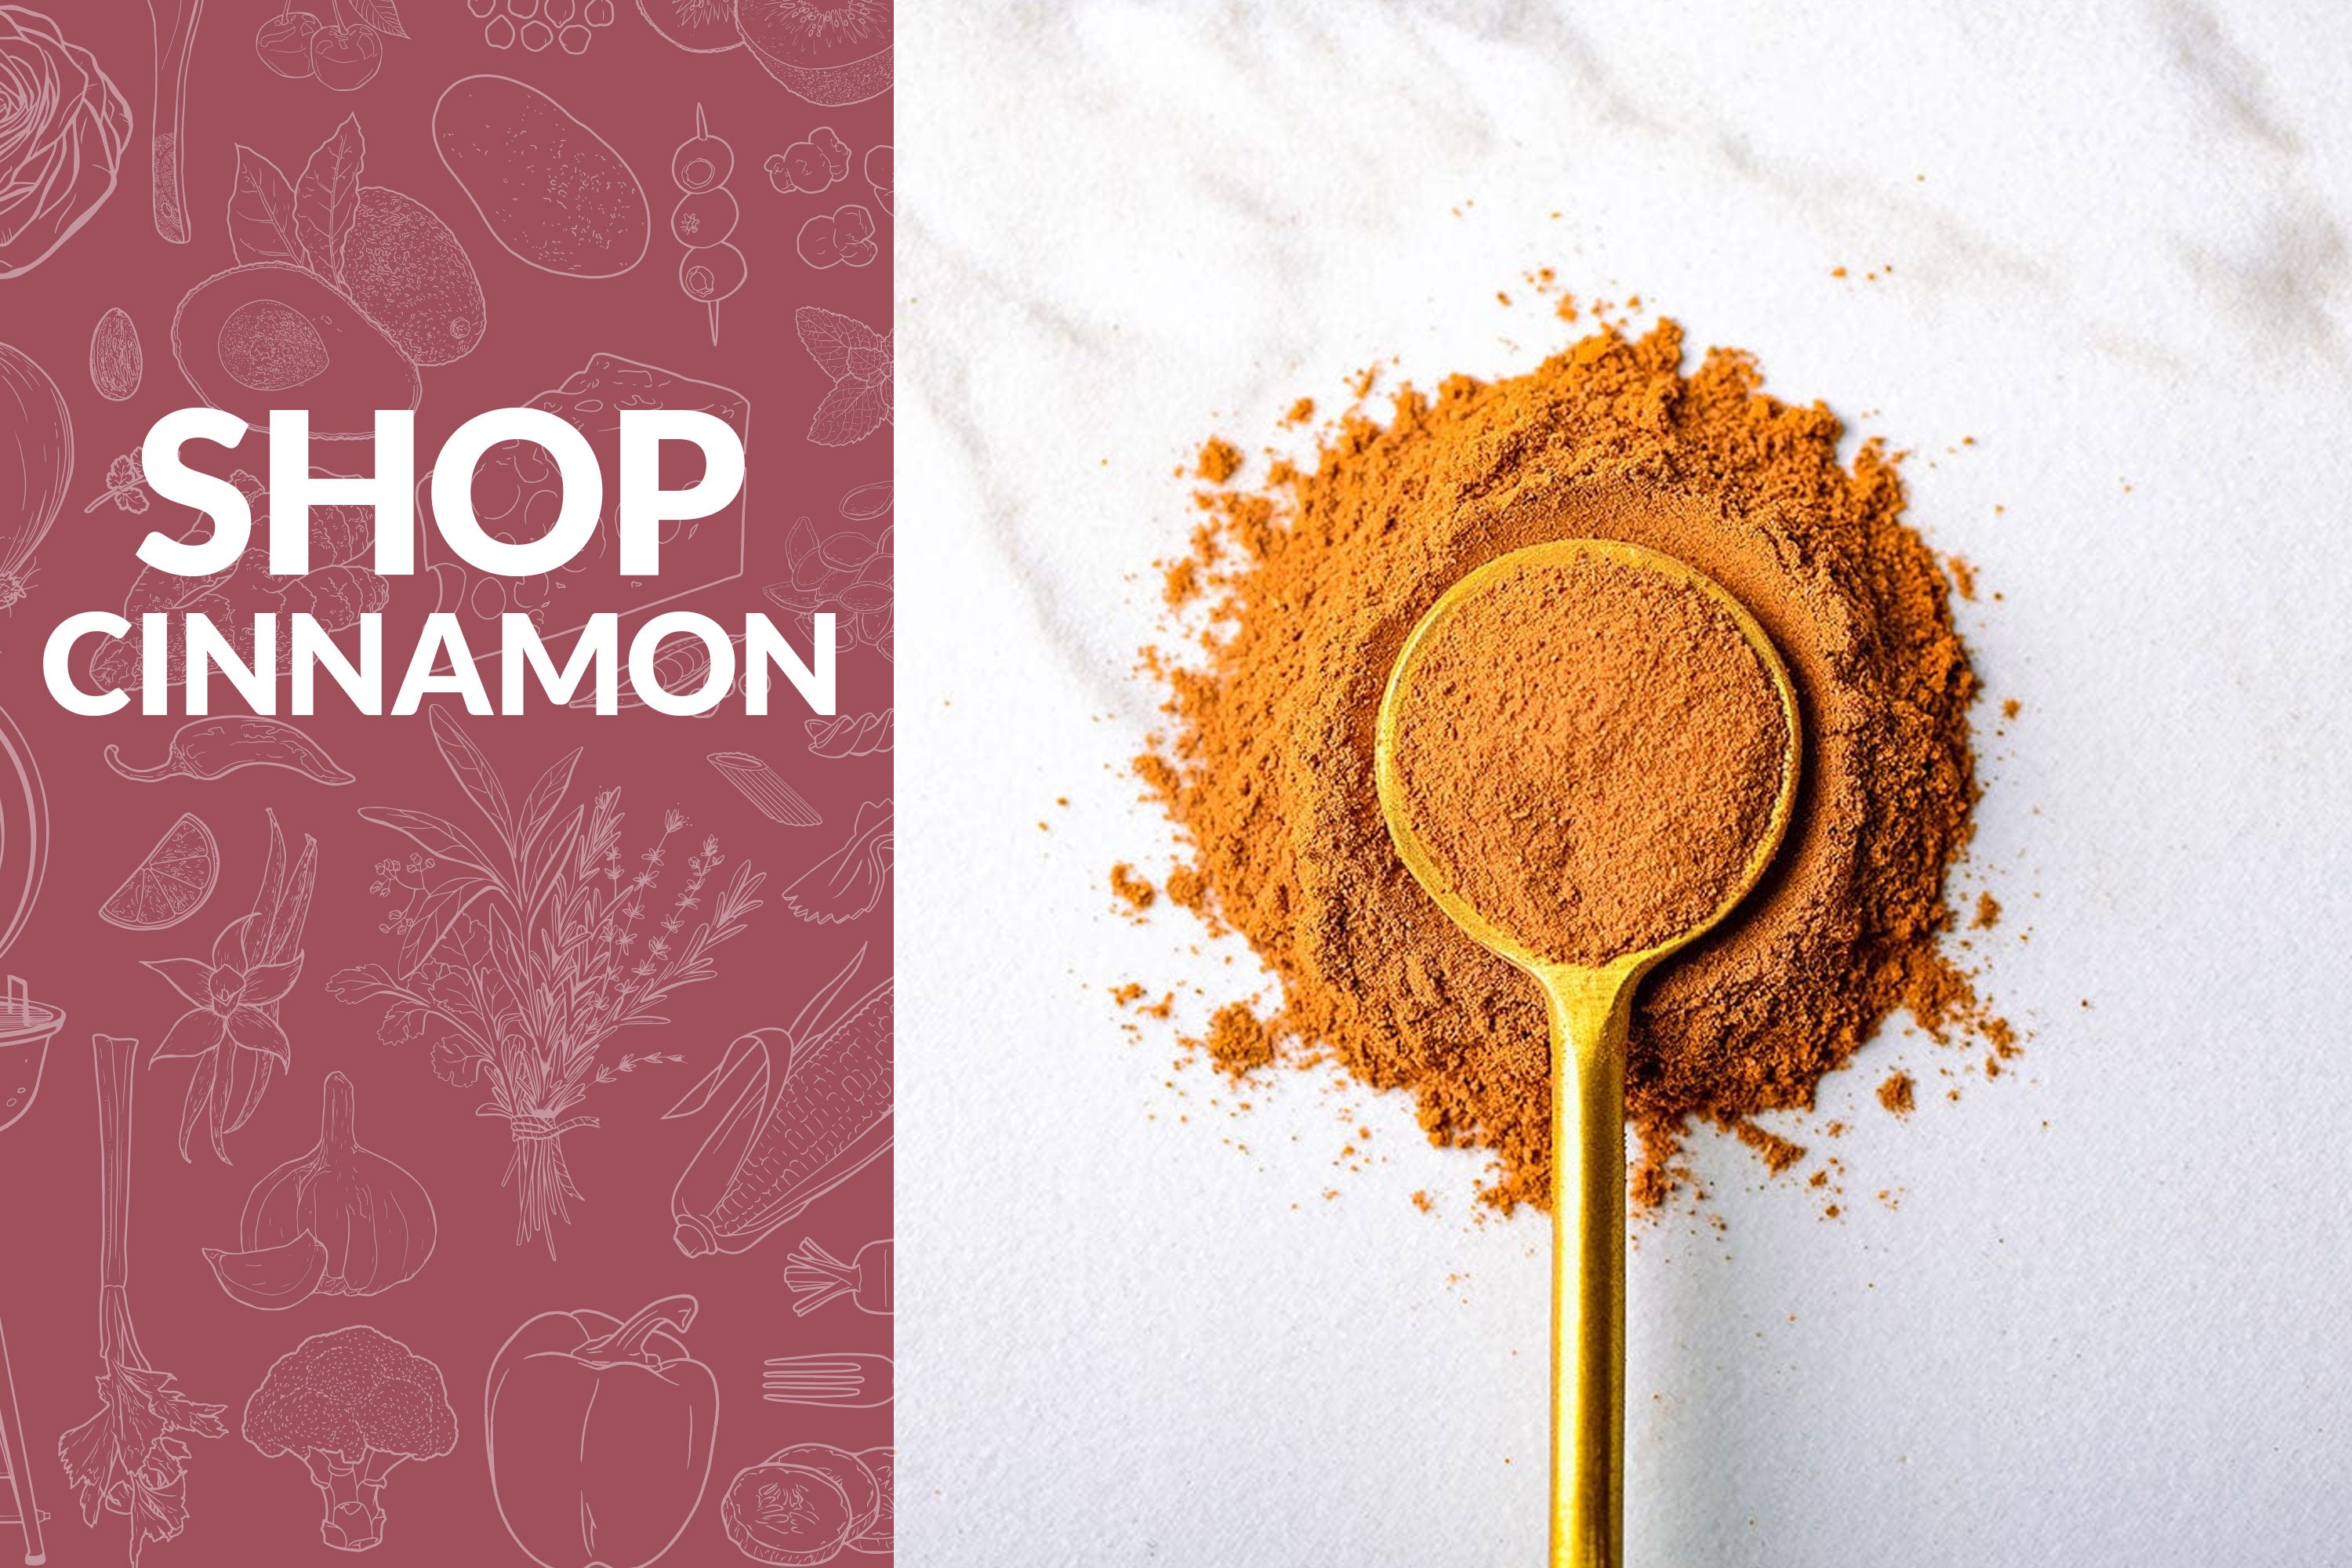 Shop Cinnamon on the left with a gold spoon of ground cinnamon on the right